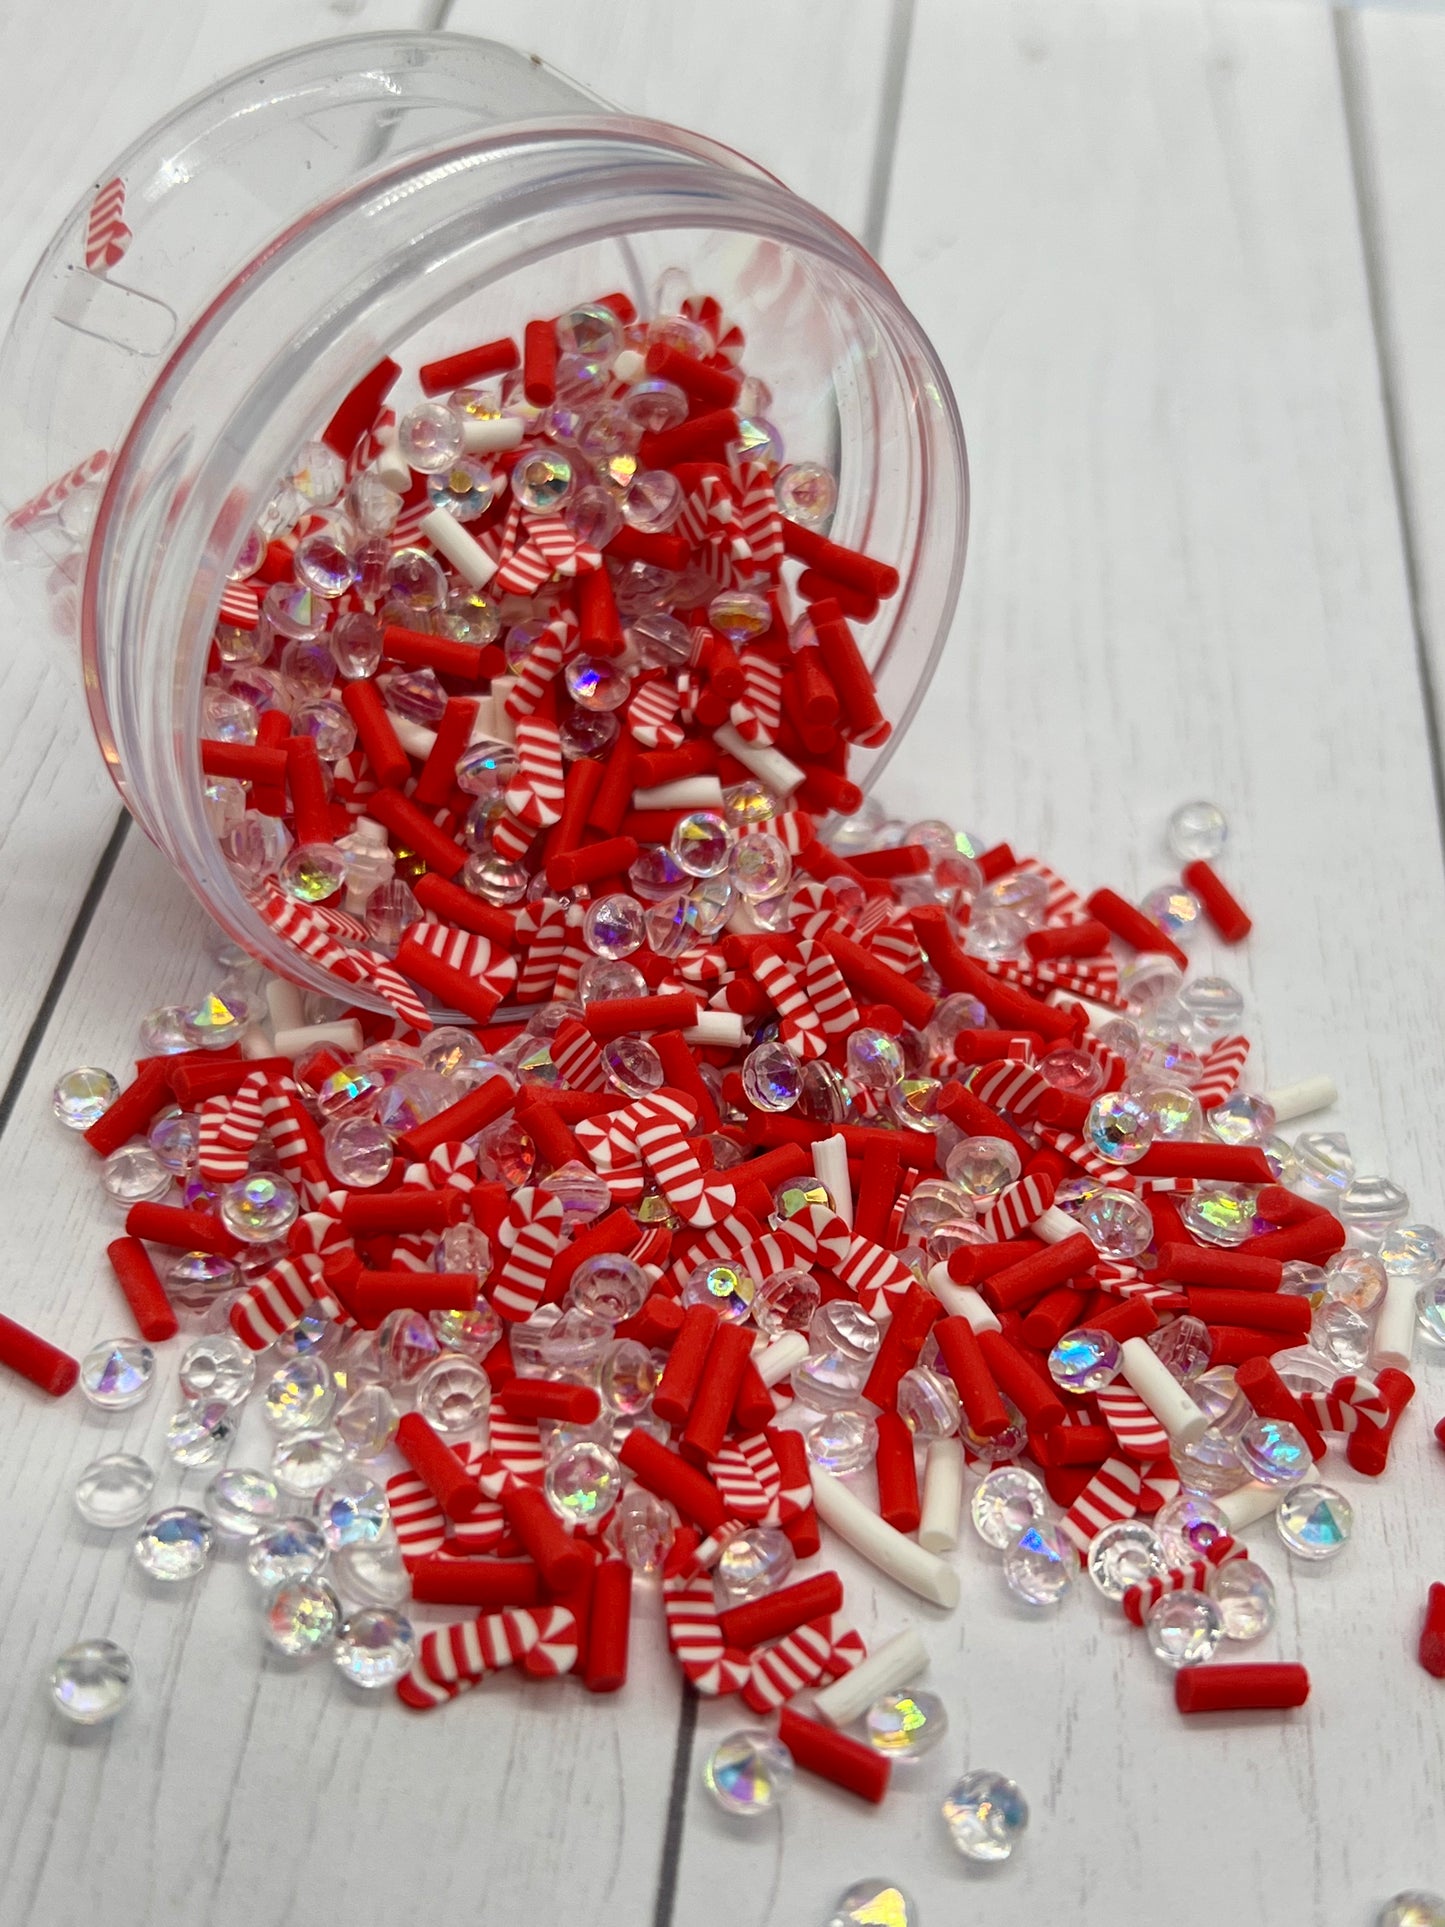 Candy cane sprinkles